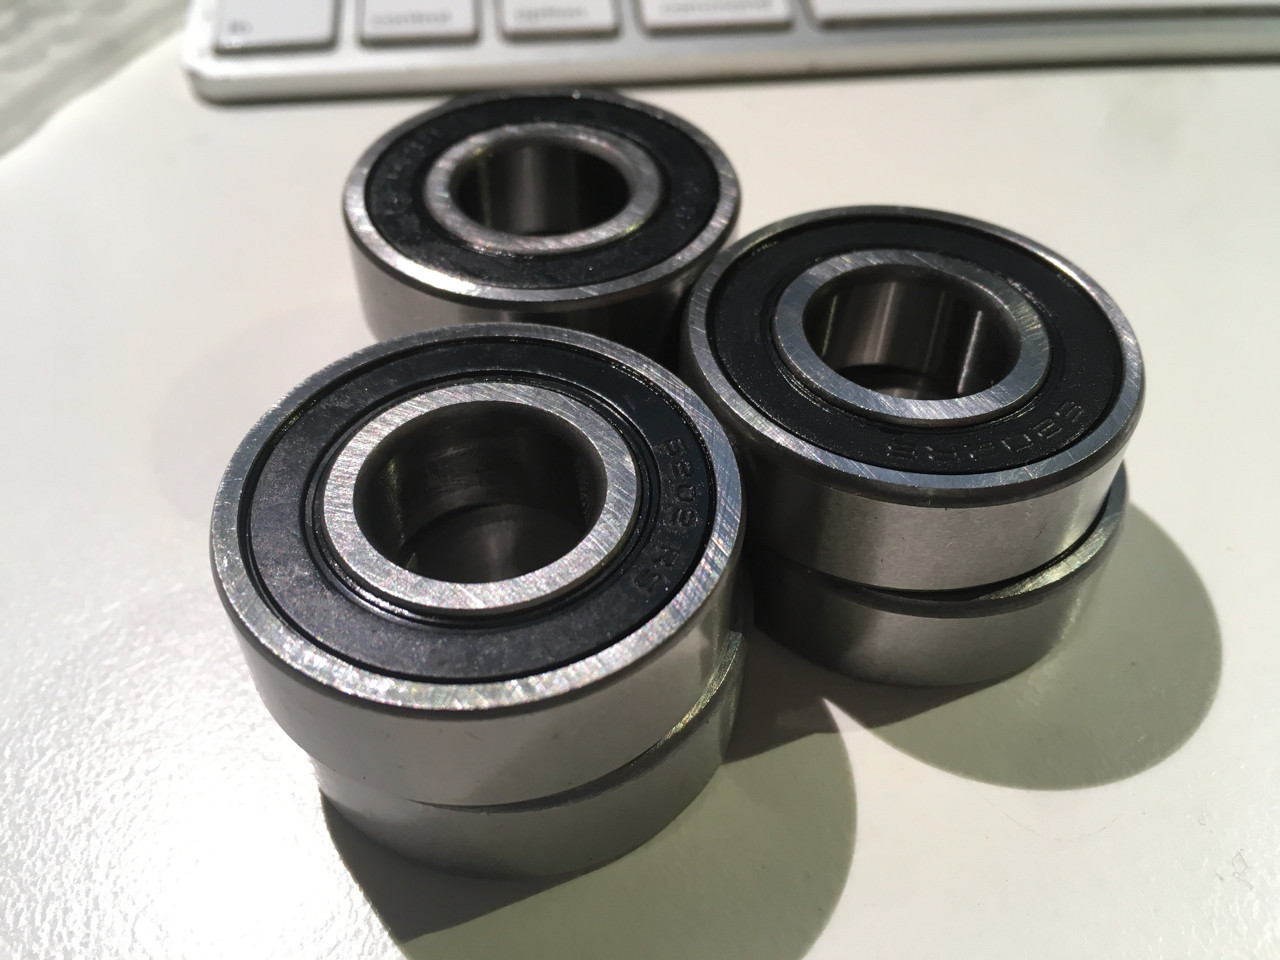 Front hub bearings - These are 6202.2 RS bearings. They are 35x16x11mm. The RS refers to rubber shielded which is what you need to keep out dust / dirt etc.

If you are using a 5/8" UNF bolt for your front axles, these are the bearings you need.